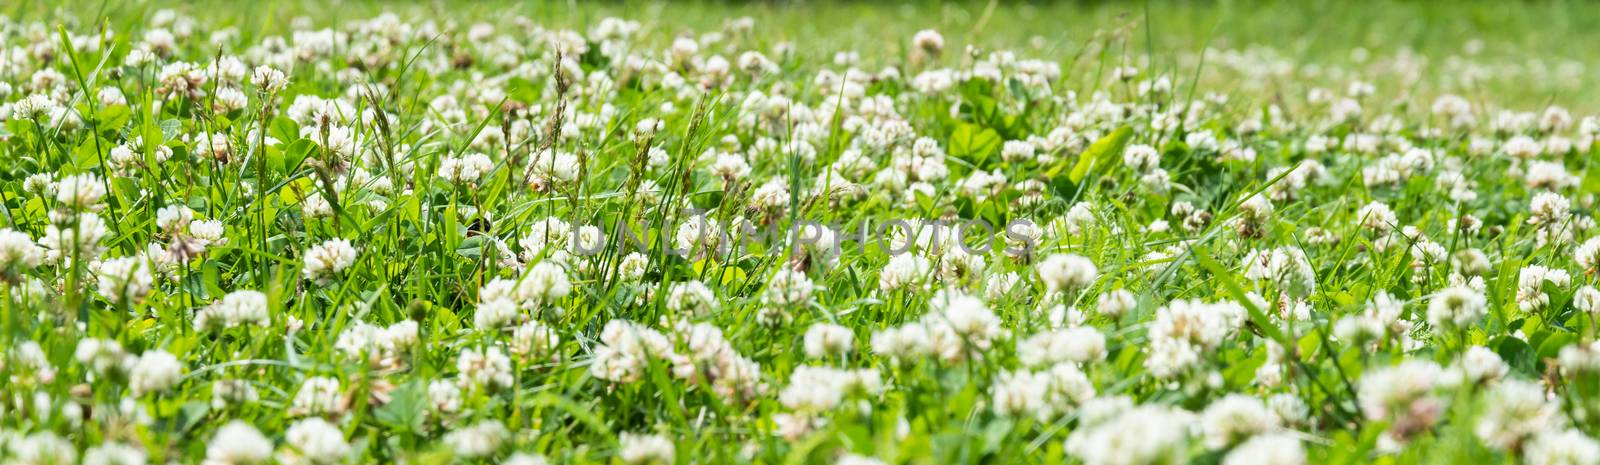 Clover Field. white Flowering clover Trifolium pratense repens. Lawn with white trefoil flowers and green grass. Fresh summer or spring background  in meadow